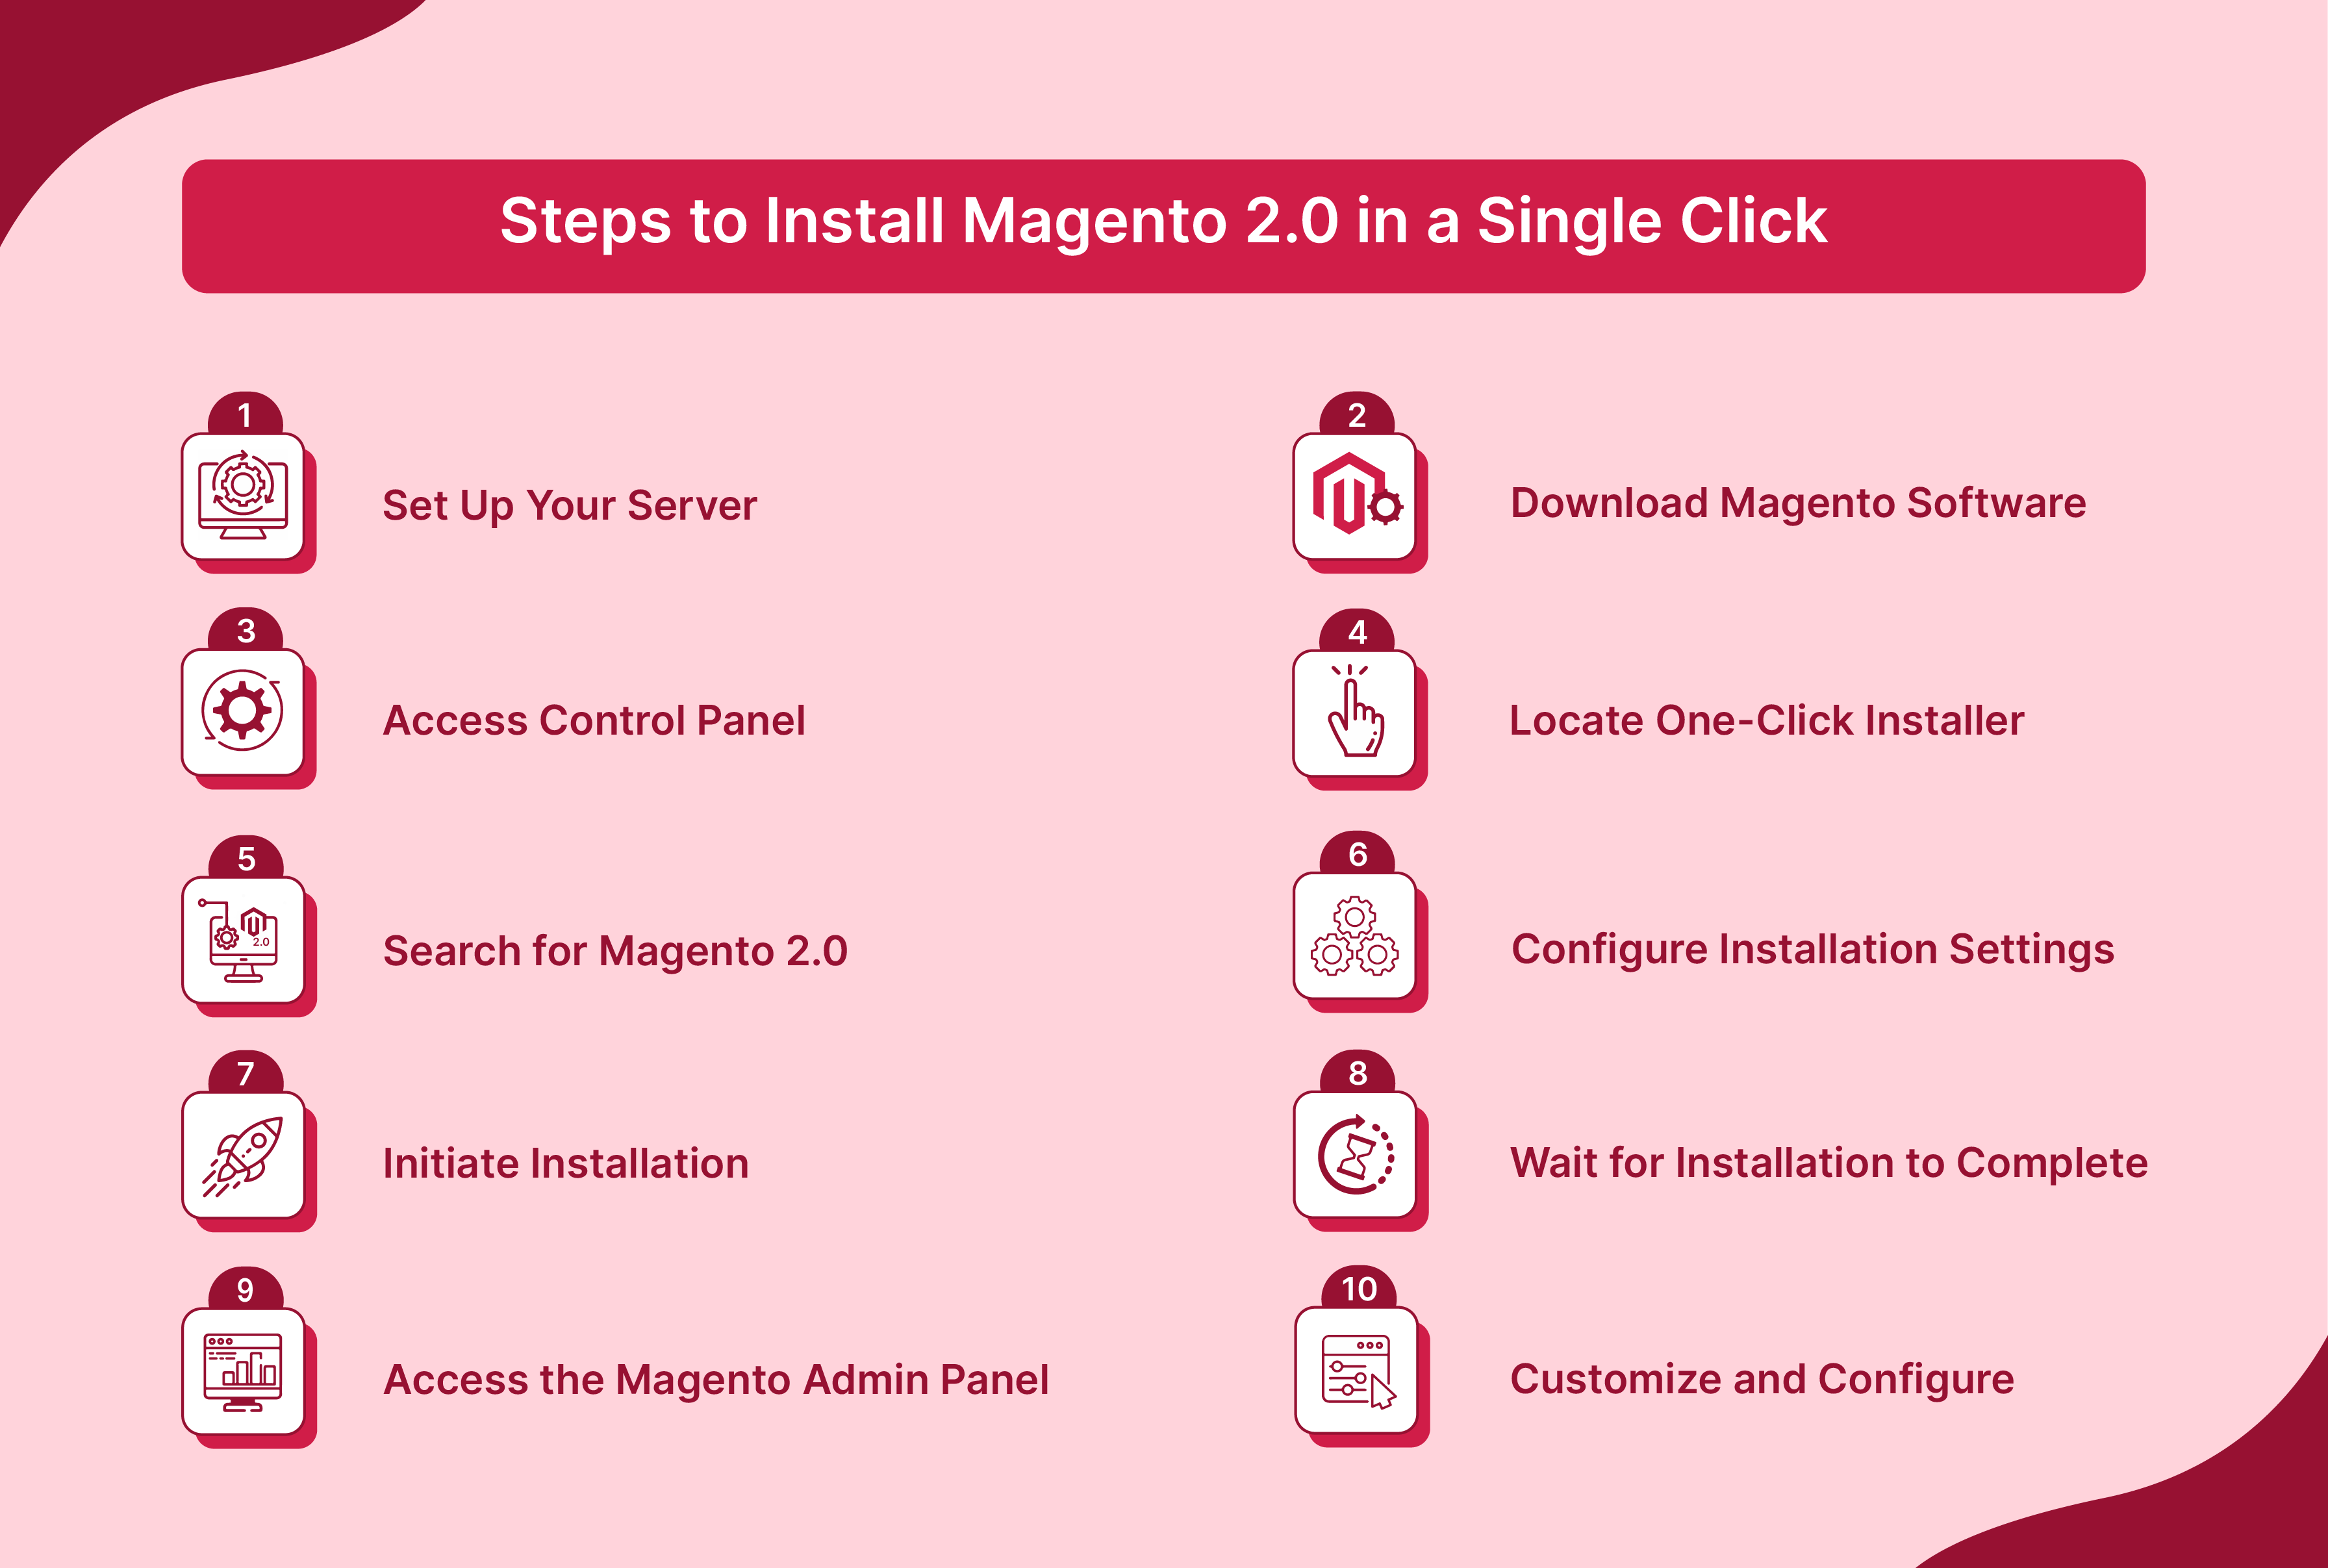 Steps to Install Magento 2.0 in a Single Click